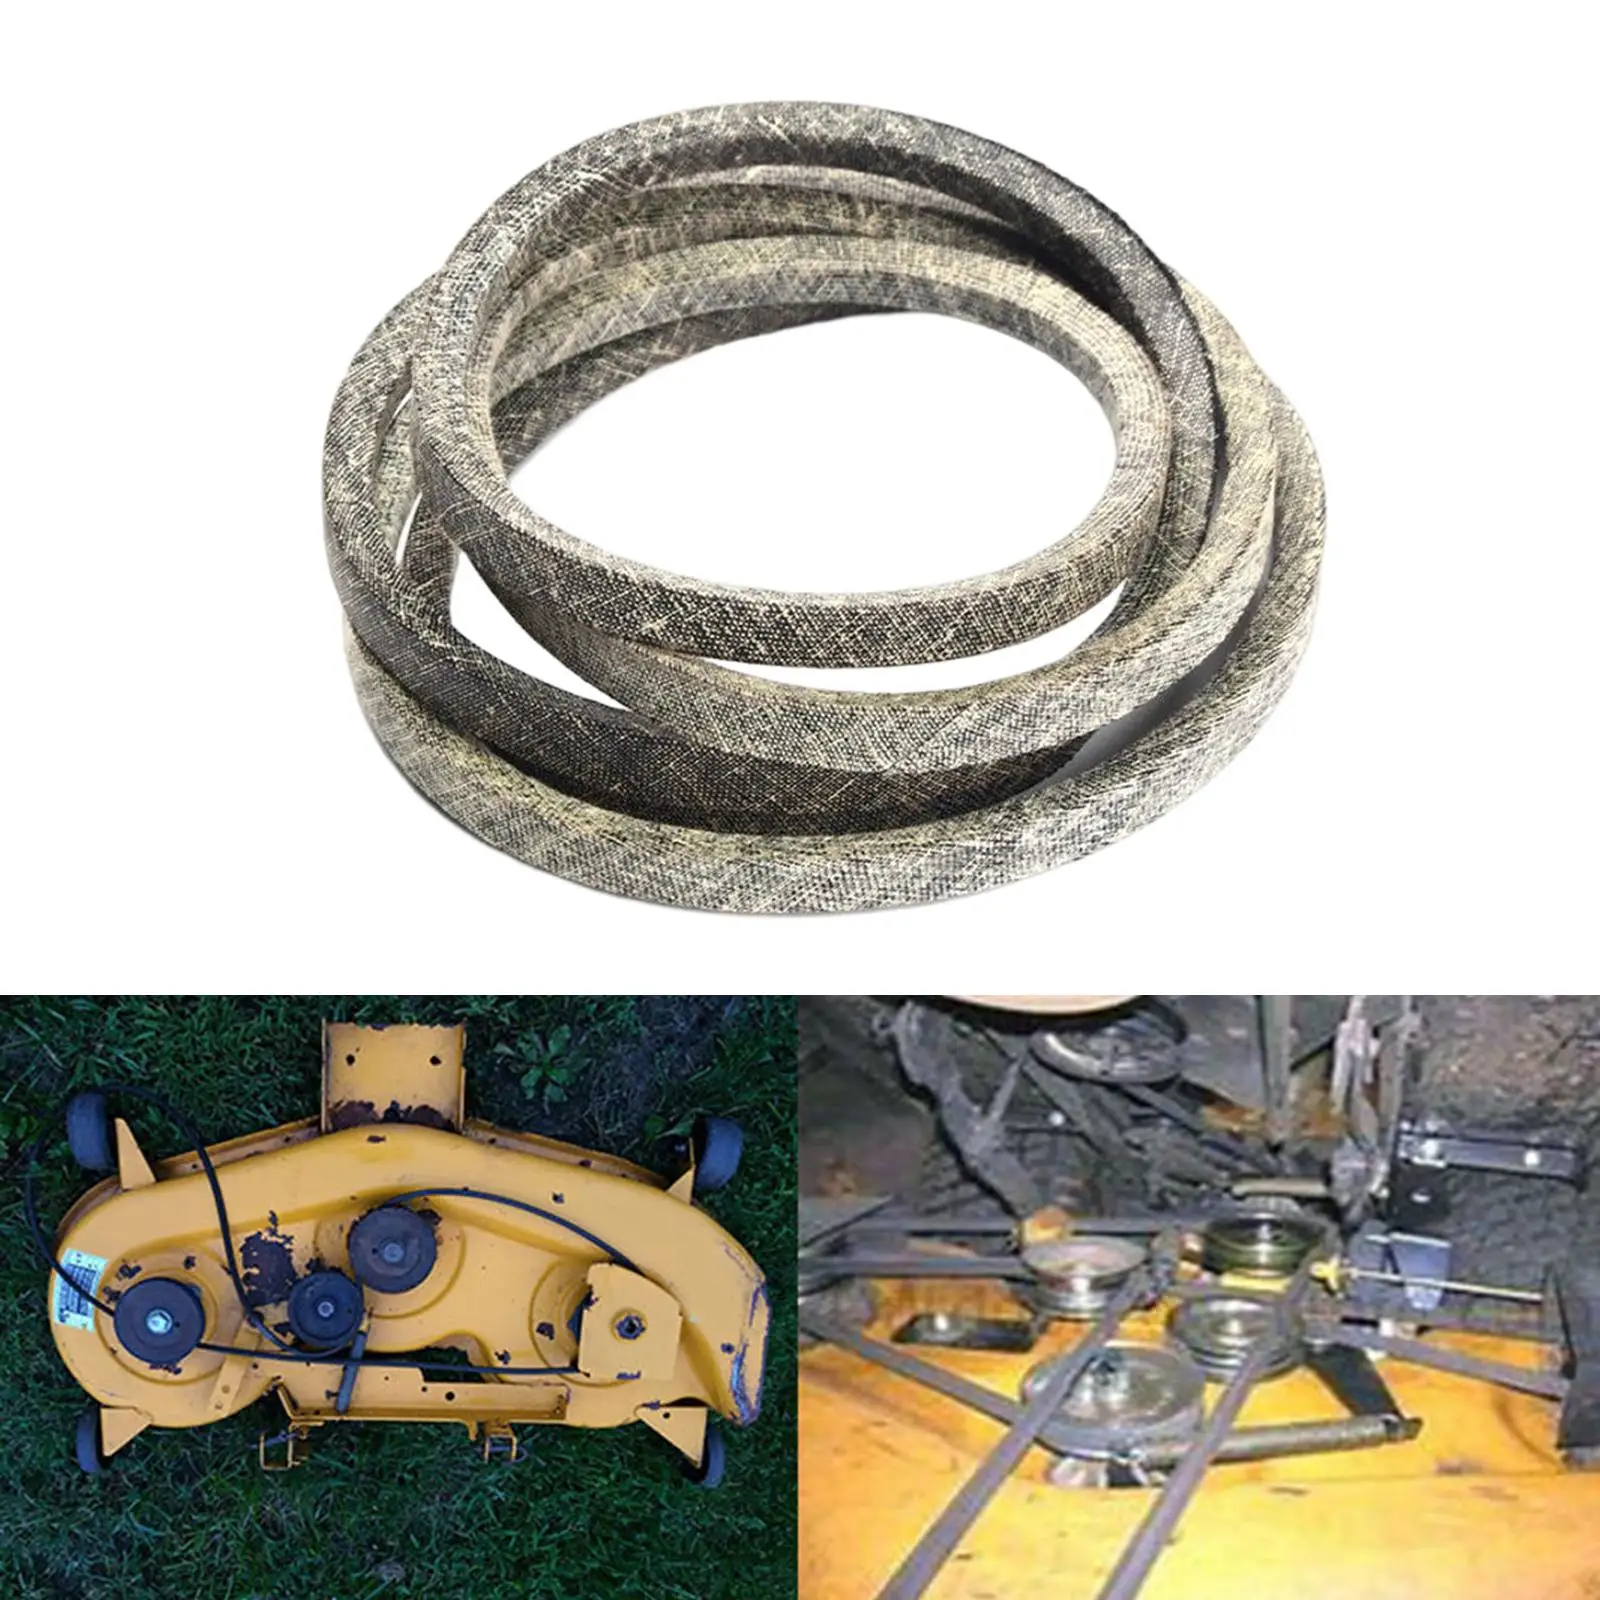 Professional Mower Deck Belt Replacements Heat Resistance Lawn Mower Deck Belt Replacement Belt for M154621 Z245 x340 Accs